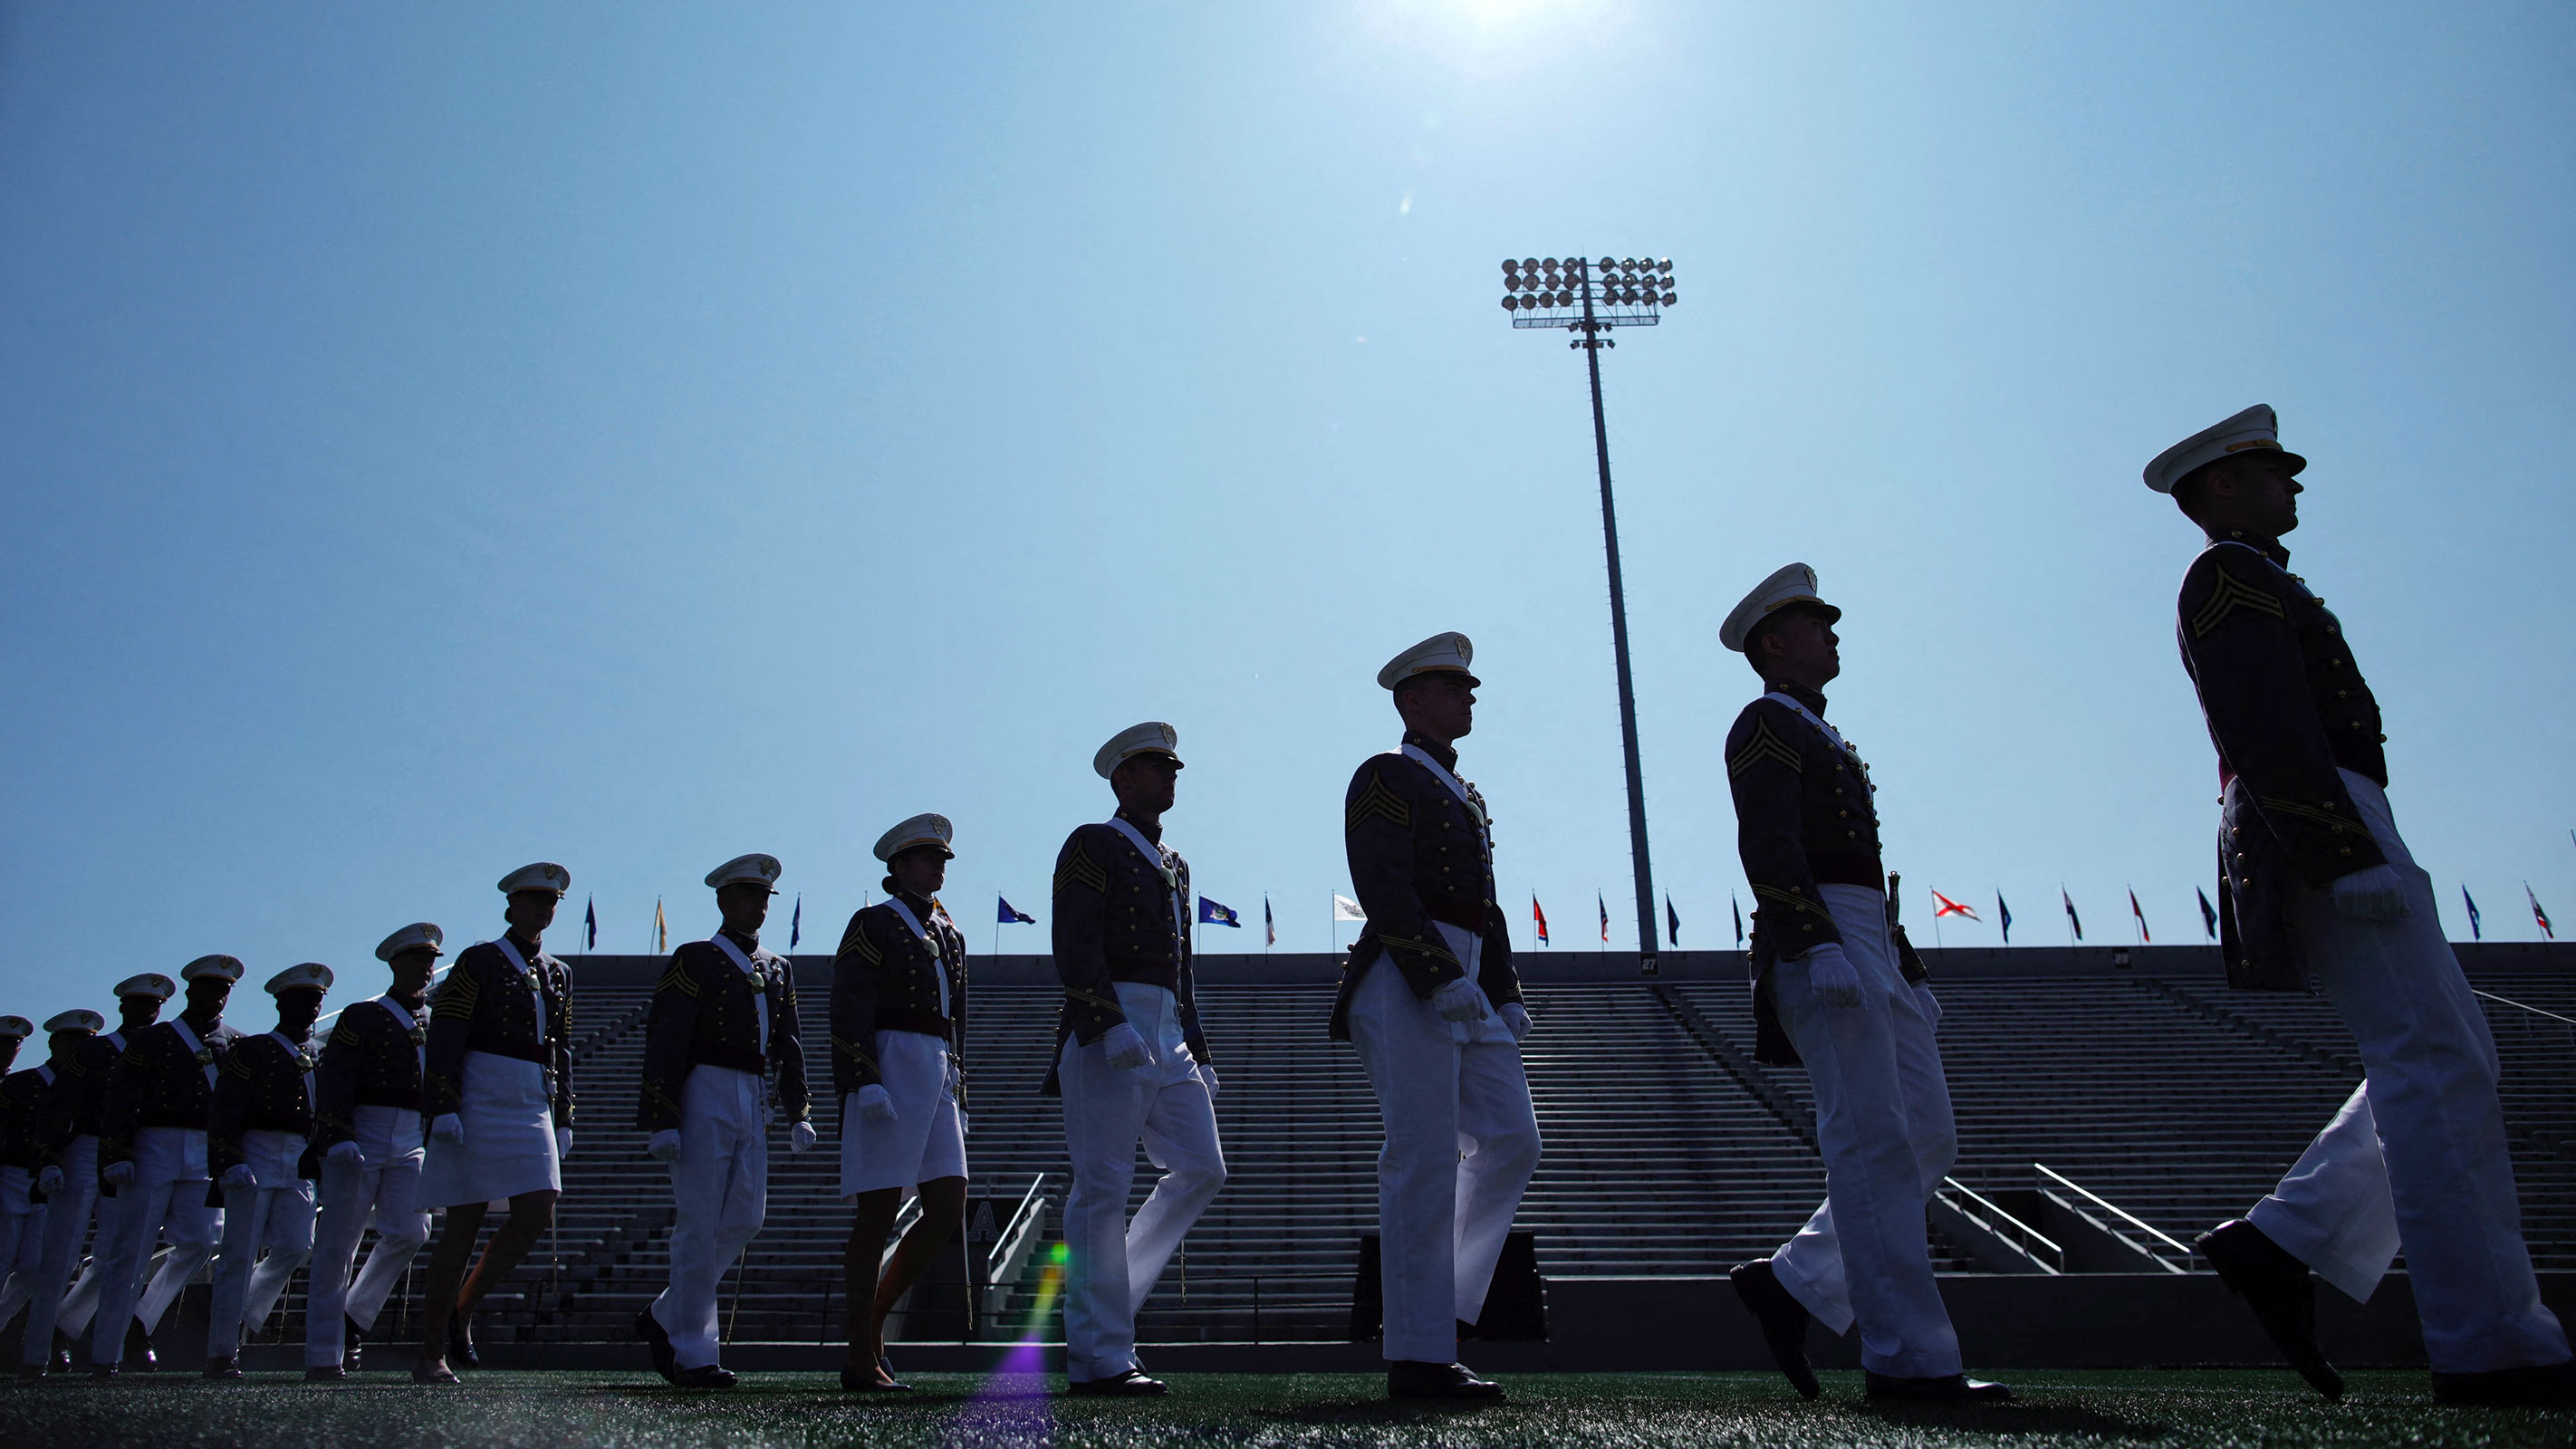 Class of 2023 cadets arrive for their graduation at the US Military Academy West Point, on May 27 in West Point, New York. 